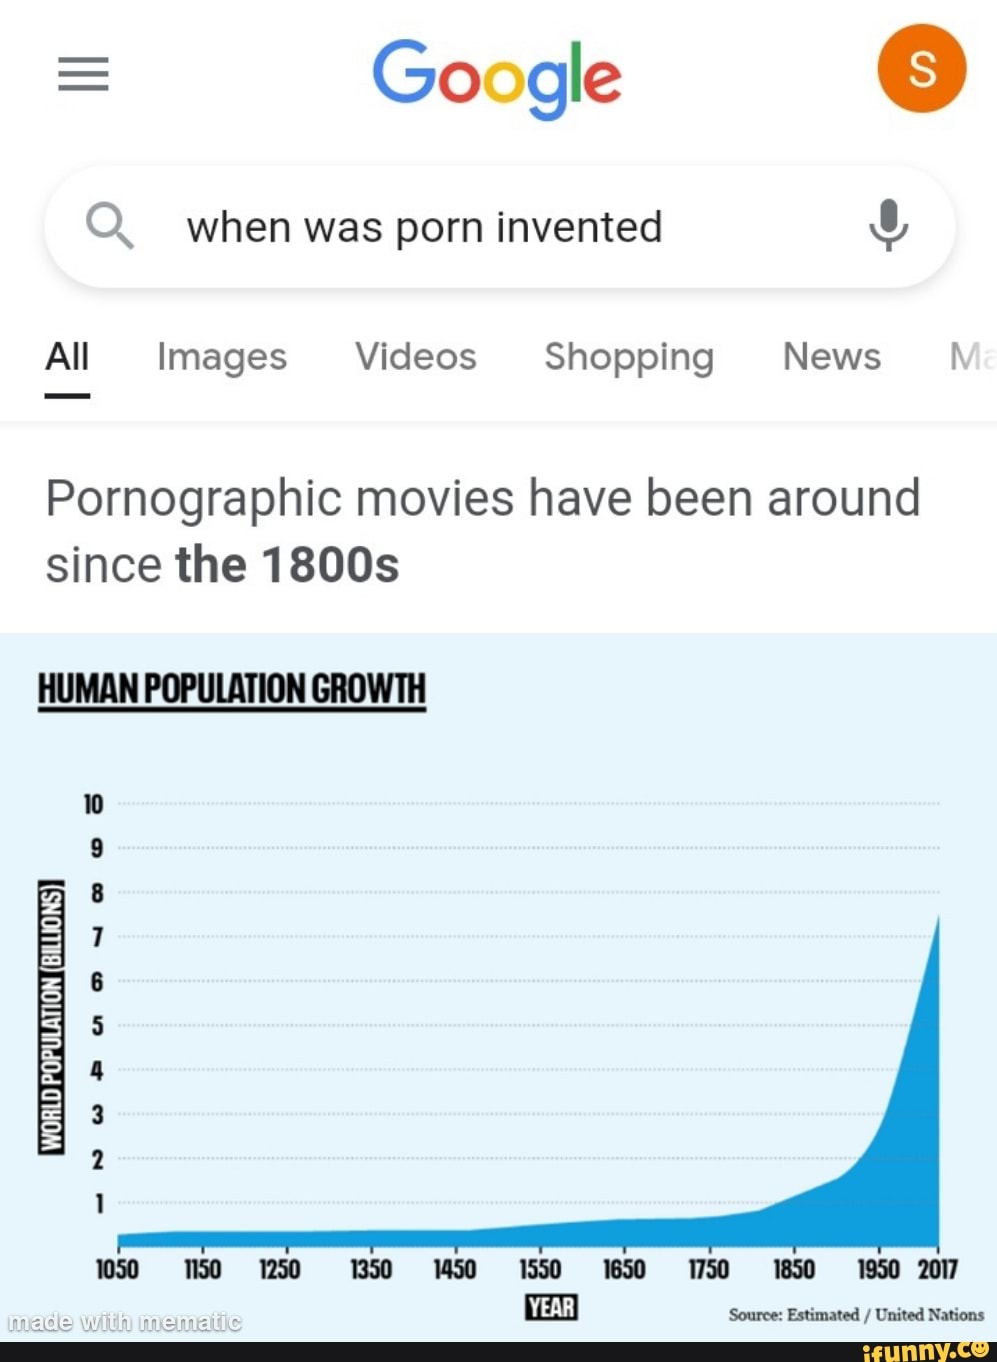 997px x 1362px - Google Q when was porn invented All Images Videos Shopping News I  Pornographic movies have been around since the 1800s HUMAN POPULATION  GROWTH 1950 2017 Source: Estimated / United Nations ICIS WULWY LS - iFunny